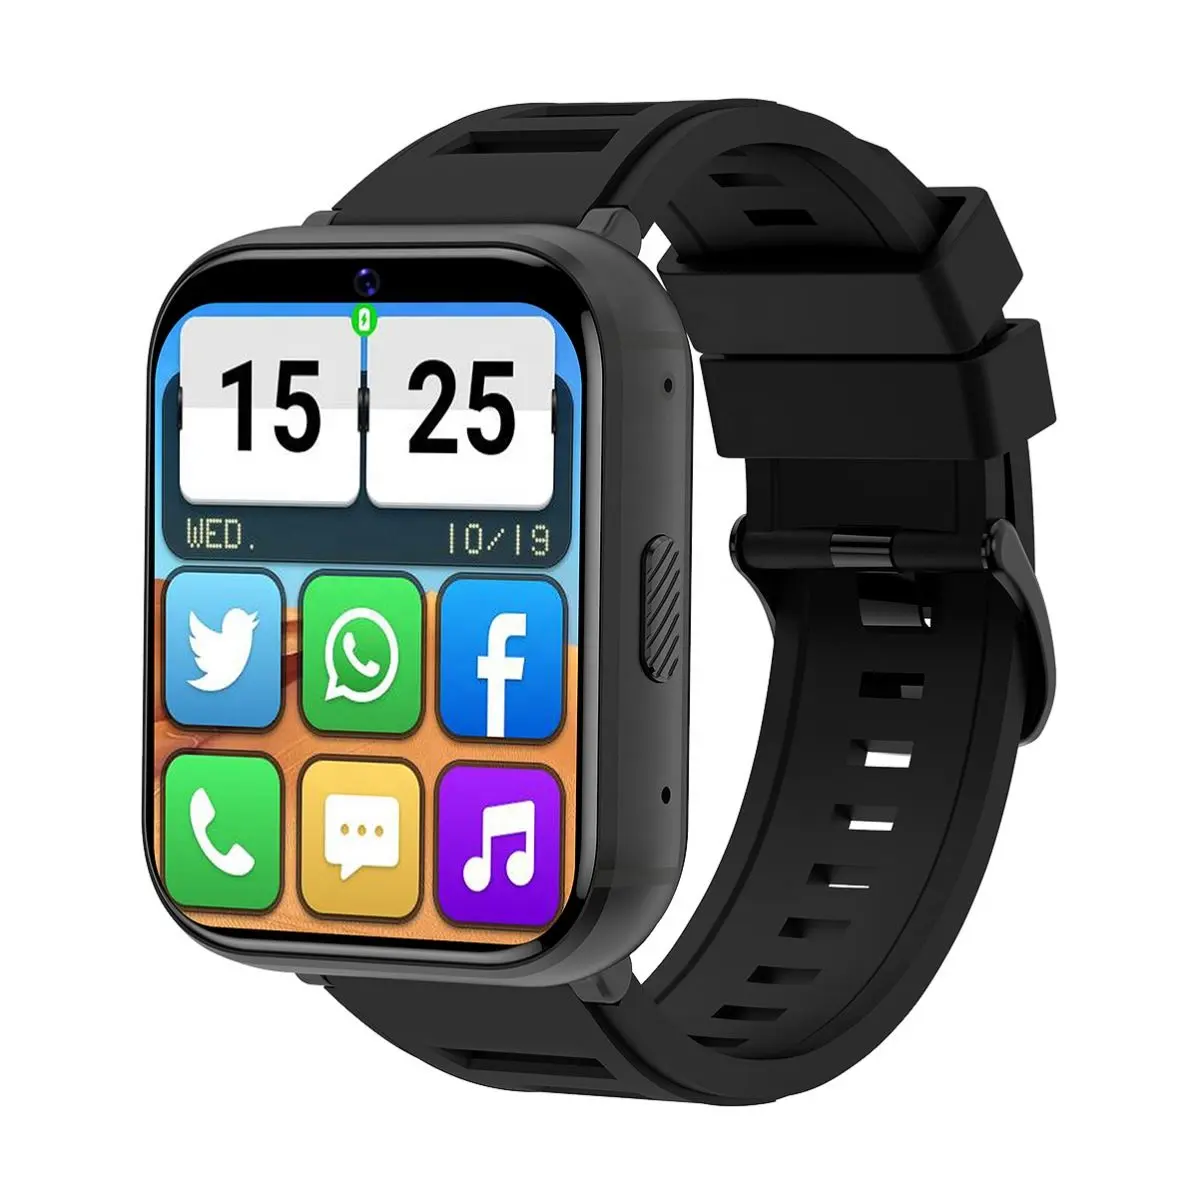 2023 New Q668 GPS Smartwatch with 4G SIM Card 930mAh Battery Leather Band Android Watch with Camera WiFi Music Week Function